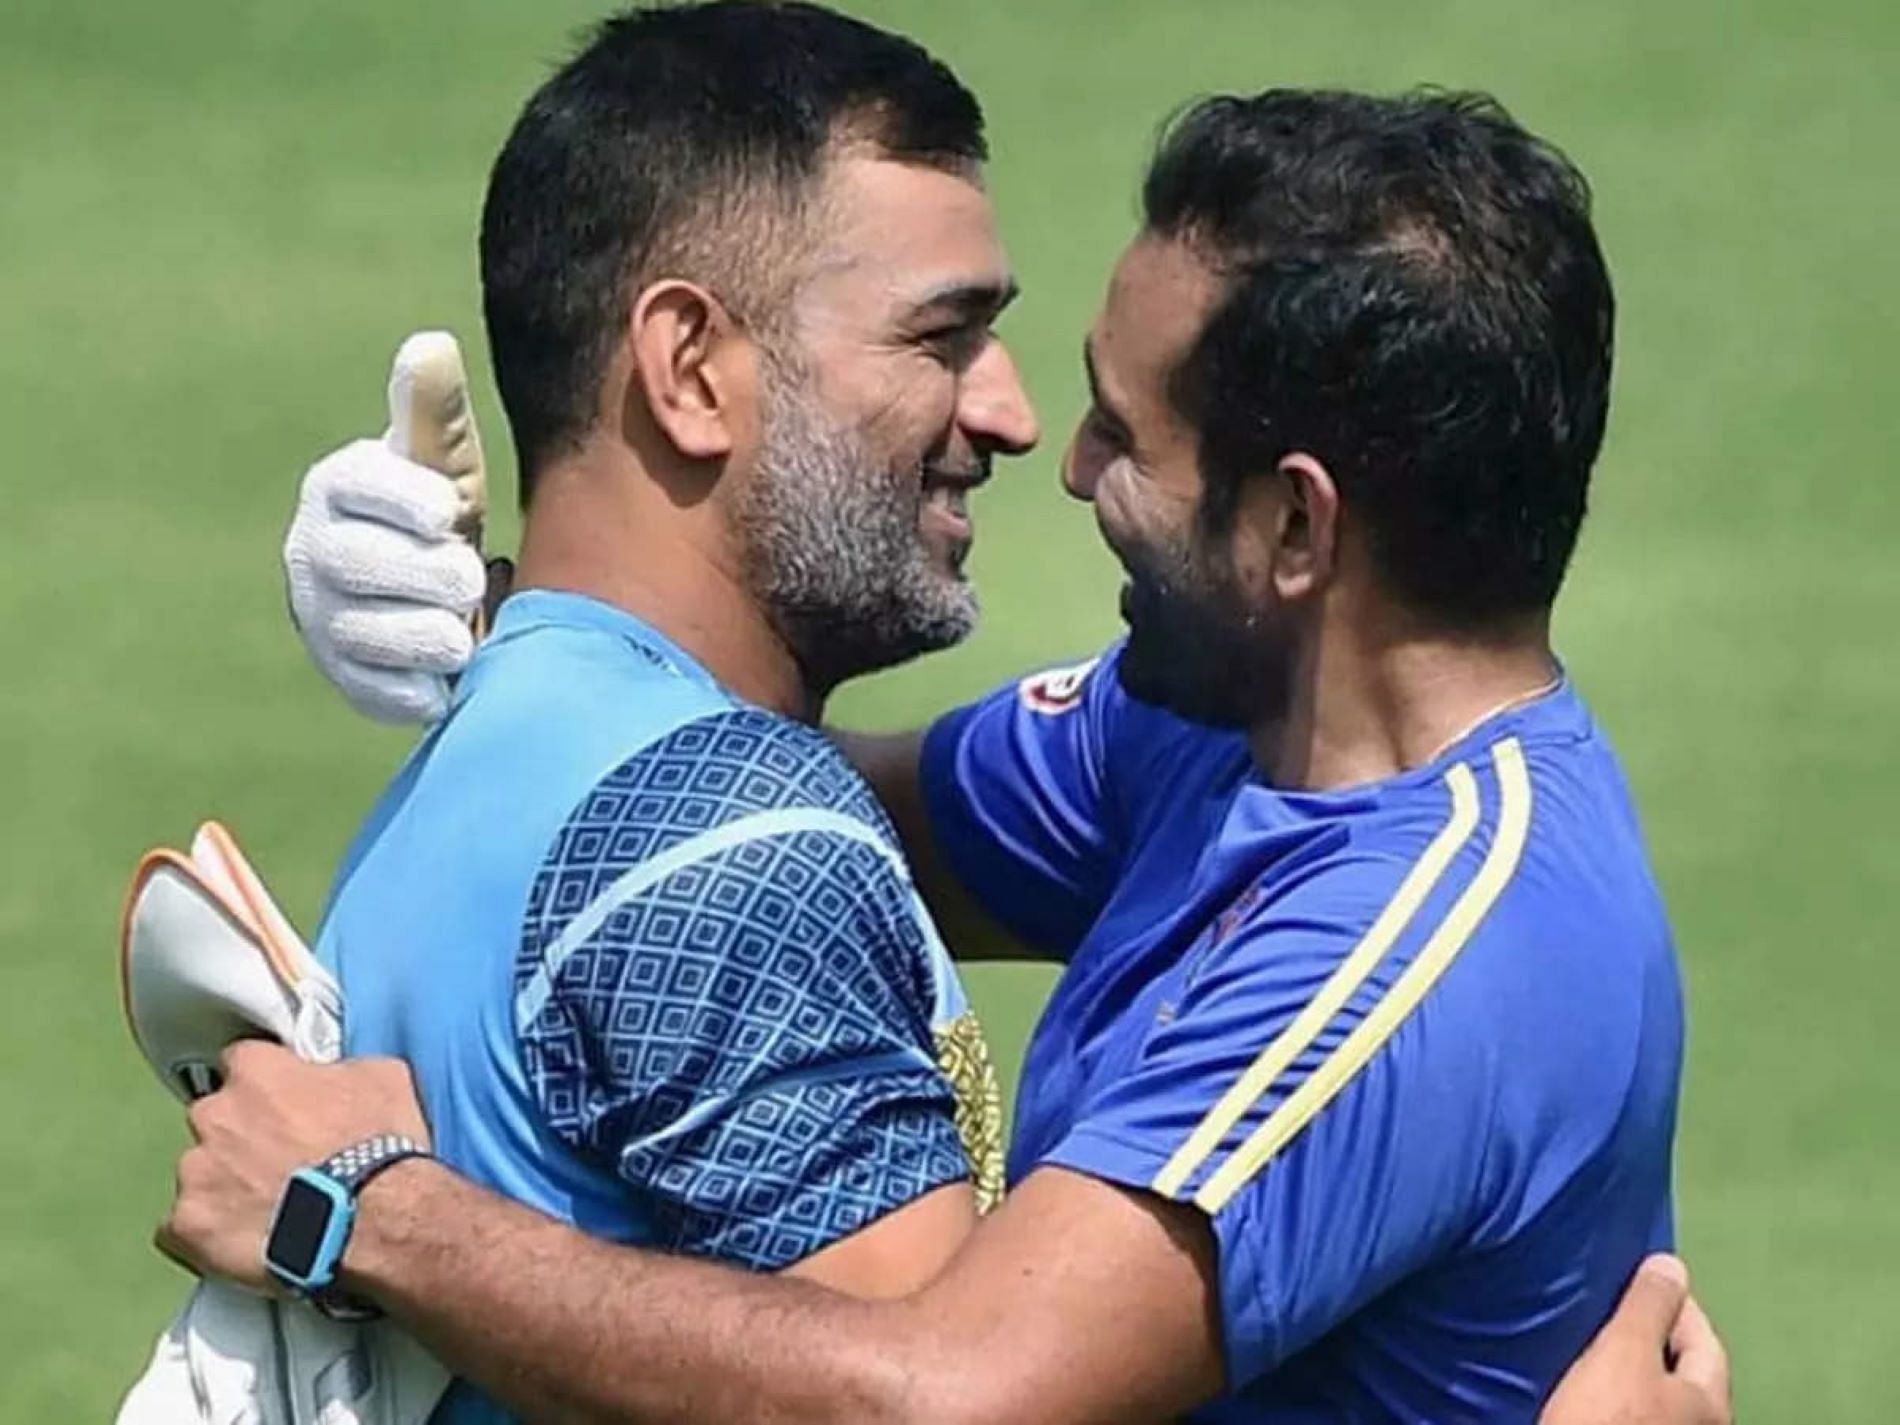 MS Dhoni and Robin Uthappa have been teammates for India and CSK over the years